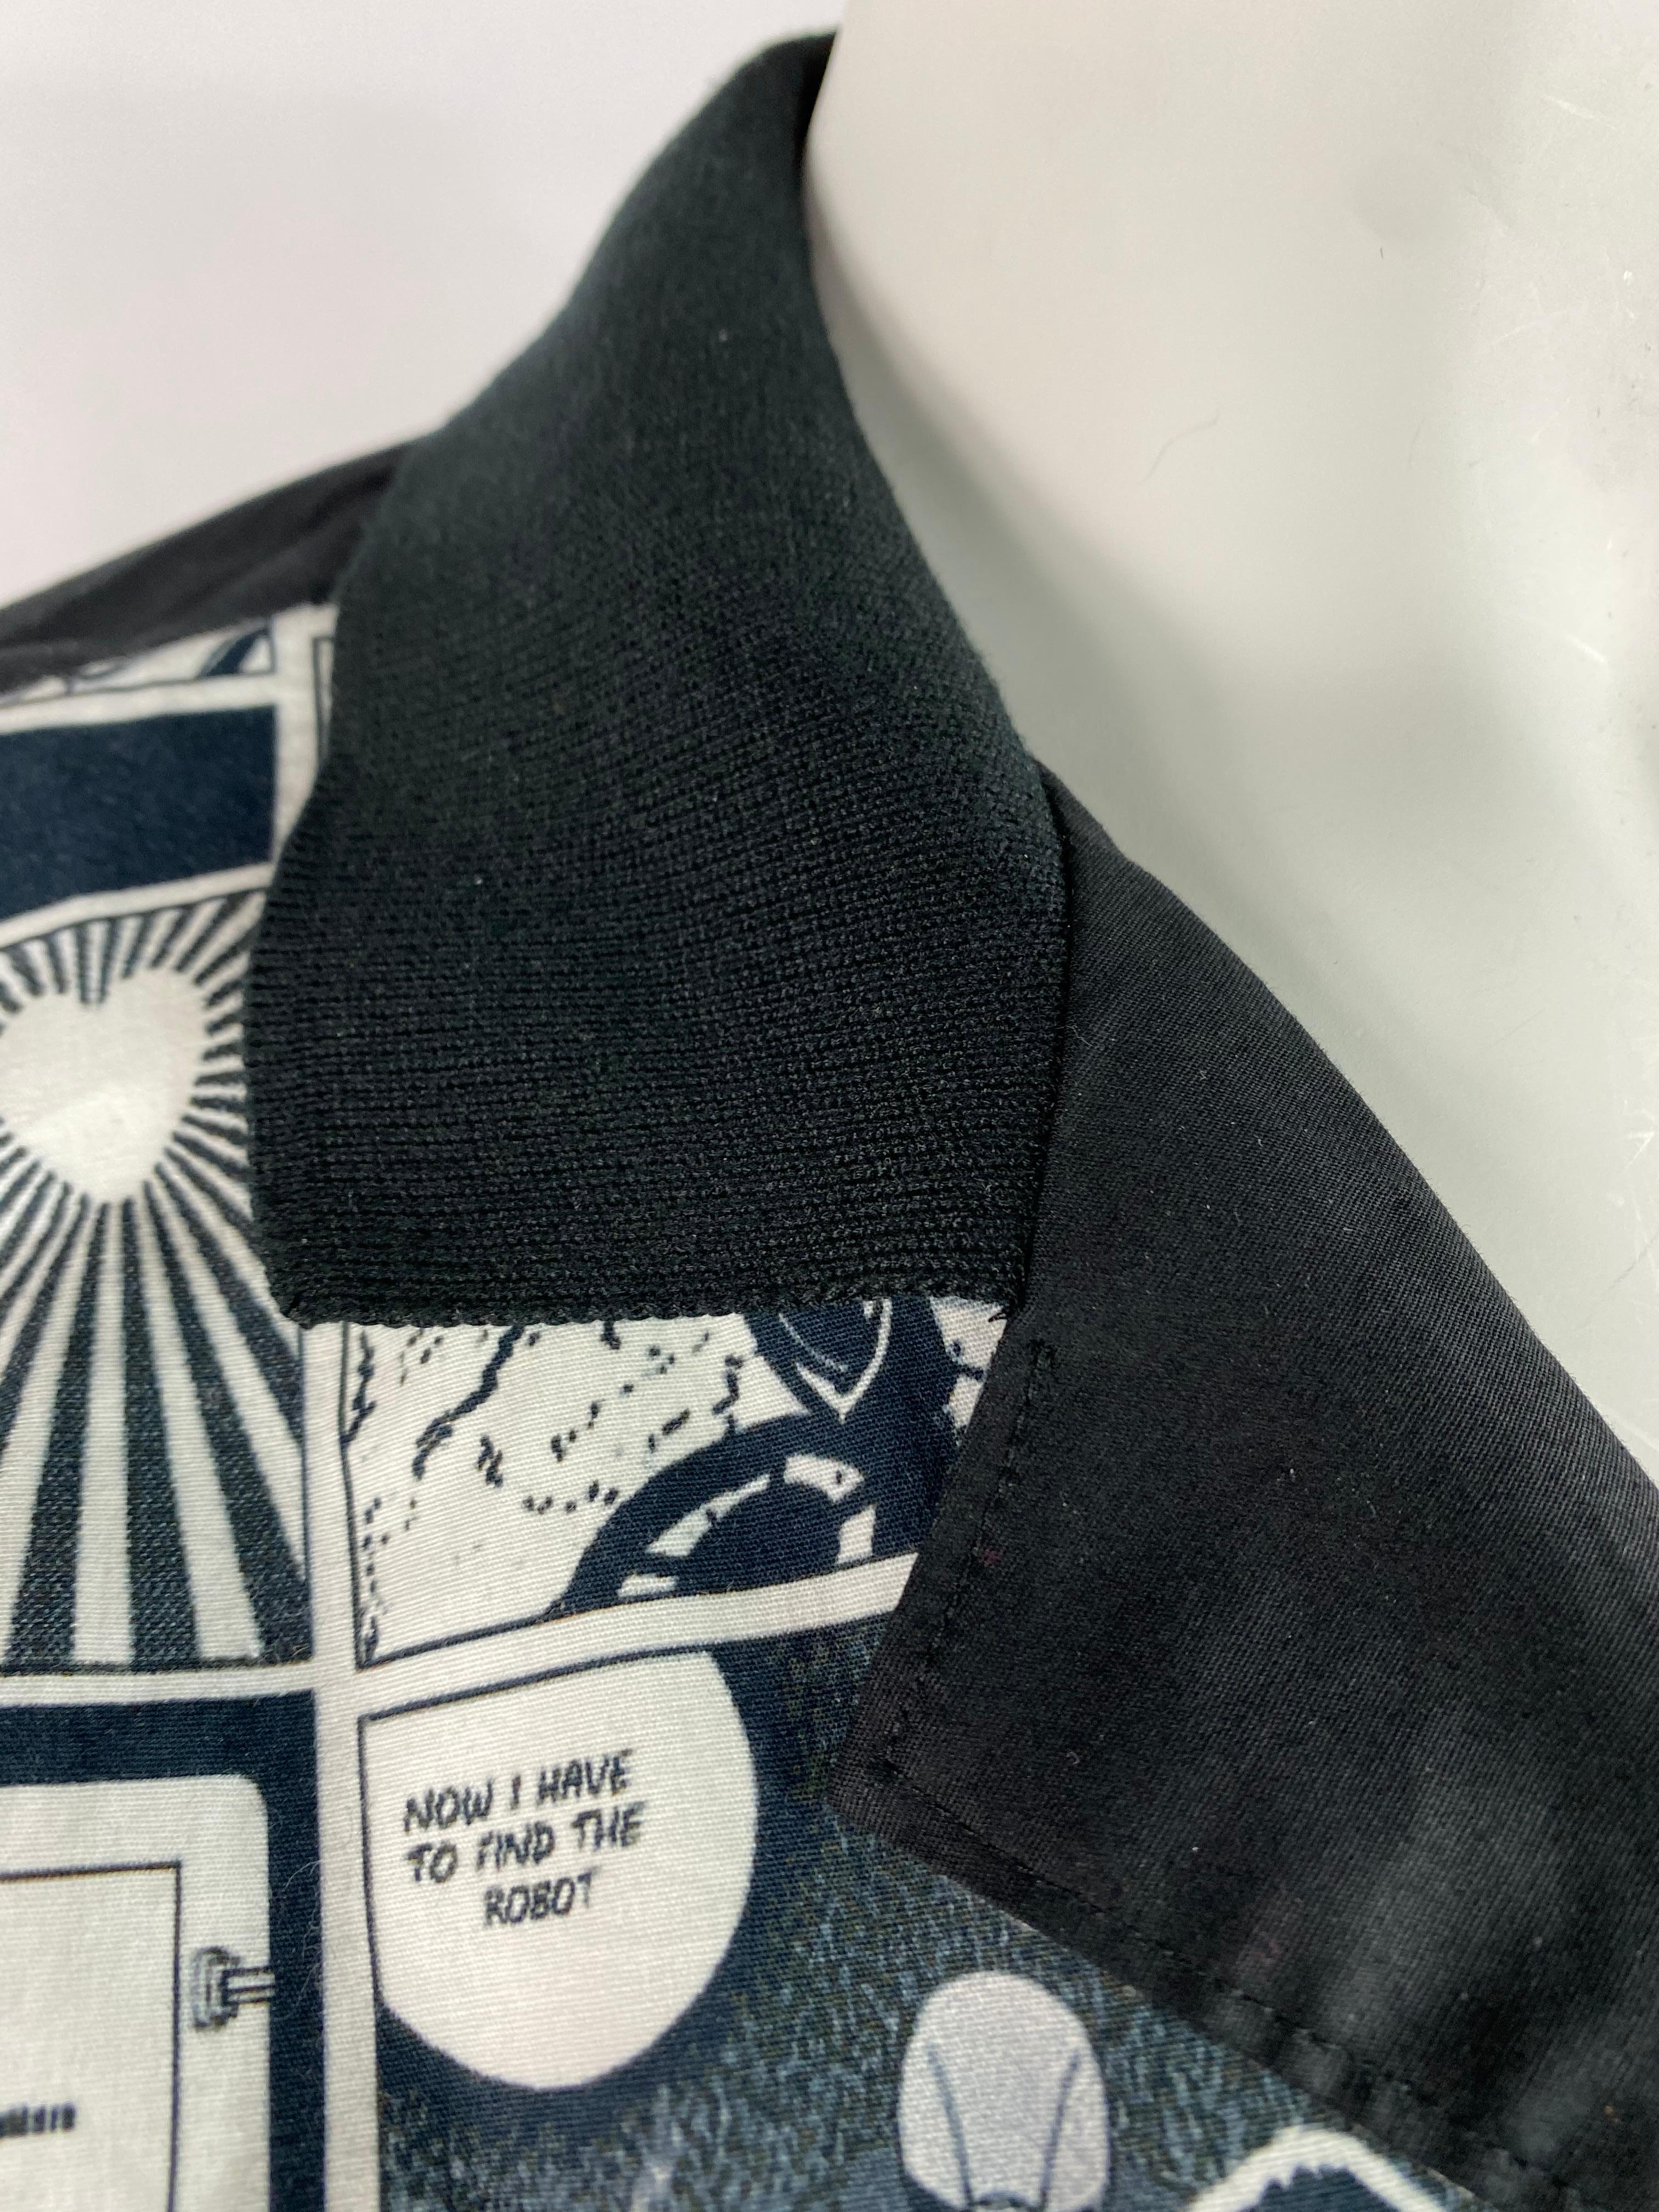 Product details:

The shirt is designed by Moschino Love, it features black, white and grey Japanese comics print on the front, collar, short sleeves and button down closure.